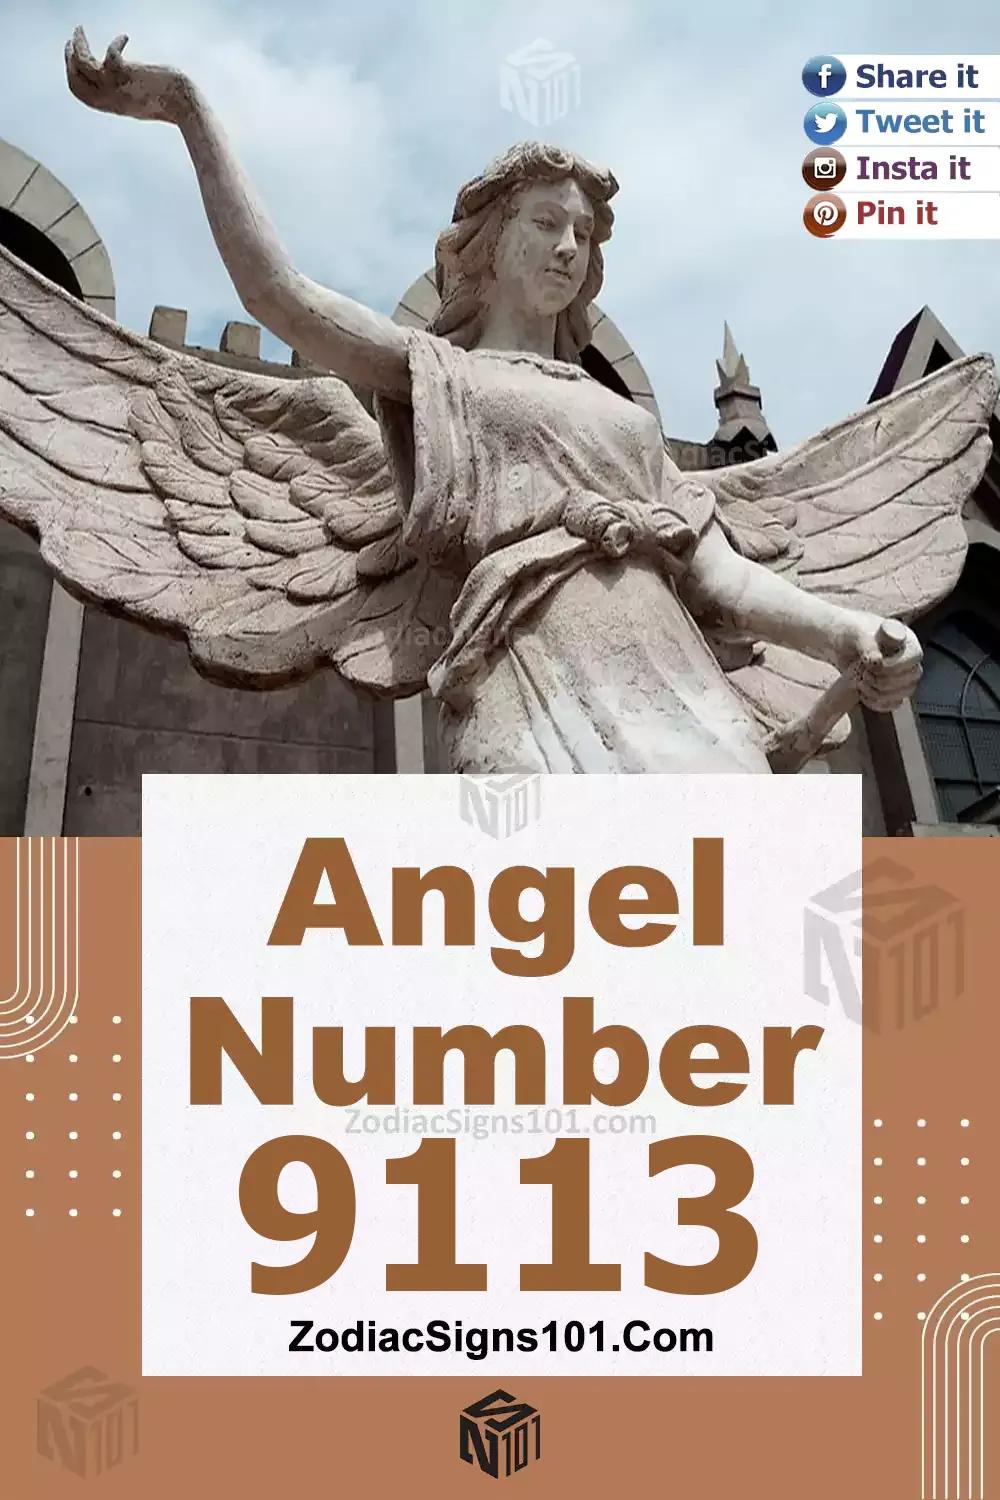 9113 Angel Number Meaning